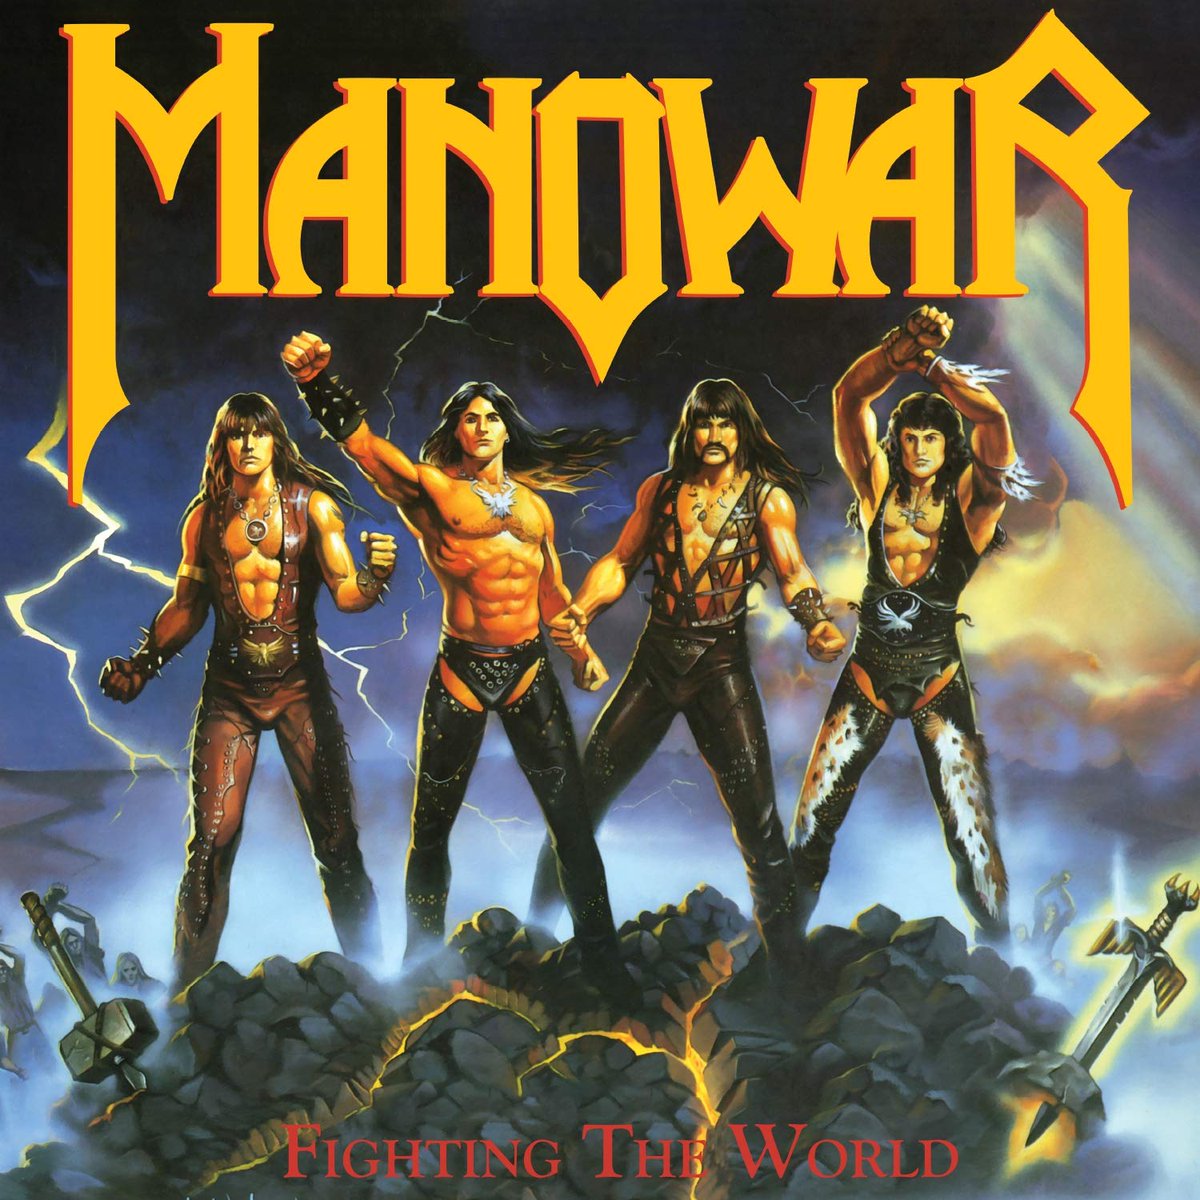 Manowar 'Fighting the World' Released February 17, 1987 Their best? Album Artwork, Kiss? Favorite tracks? Vocals? Today on @themetalvoice Note Fighting the World is the fifth album